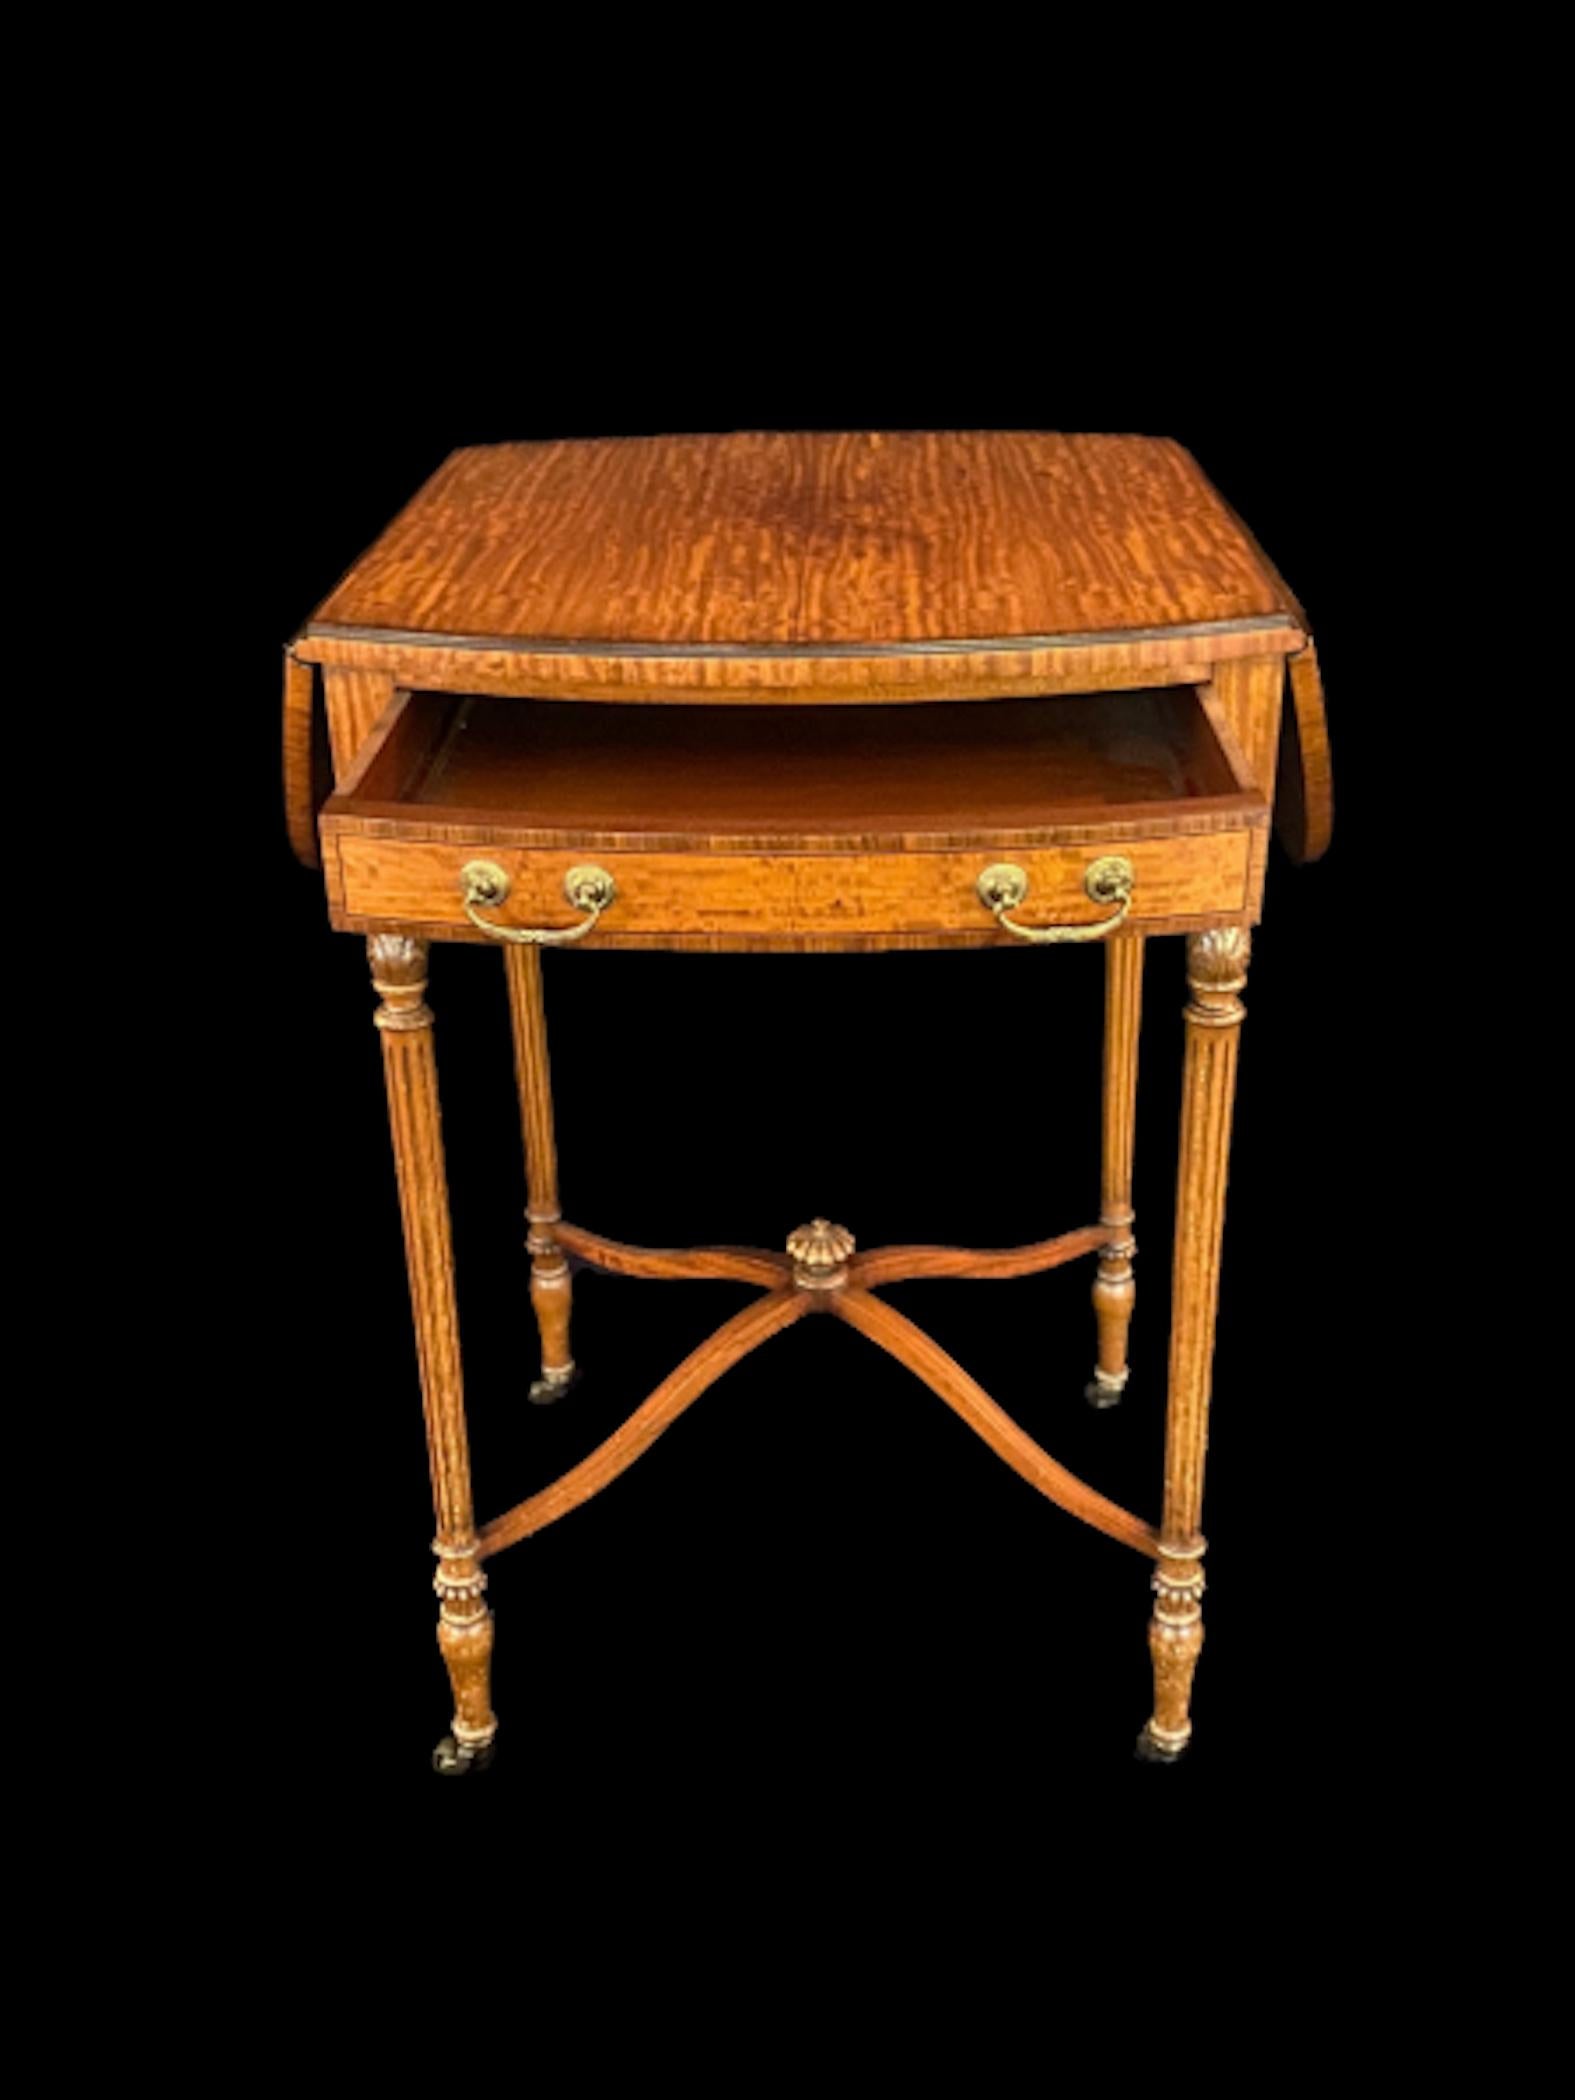 A beautiful yet delicate satinwood drop leaf oval foldable side table with remarkable natural warm tones. Standing upon four reeded legs finished with brass castors, the table also has a flush drawer is elegant brass handles. When the table top is